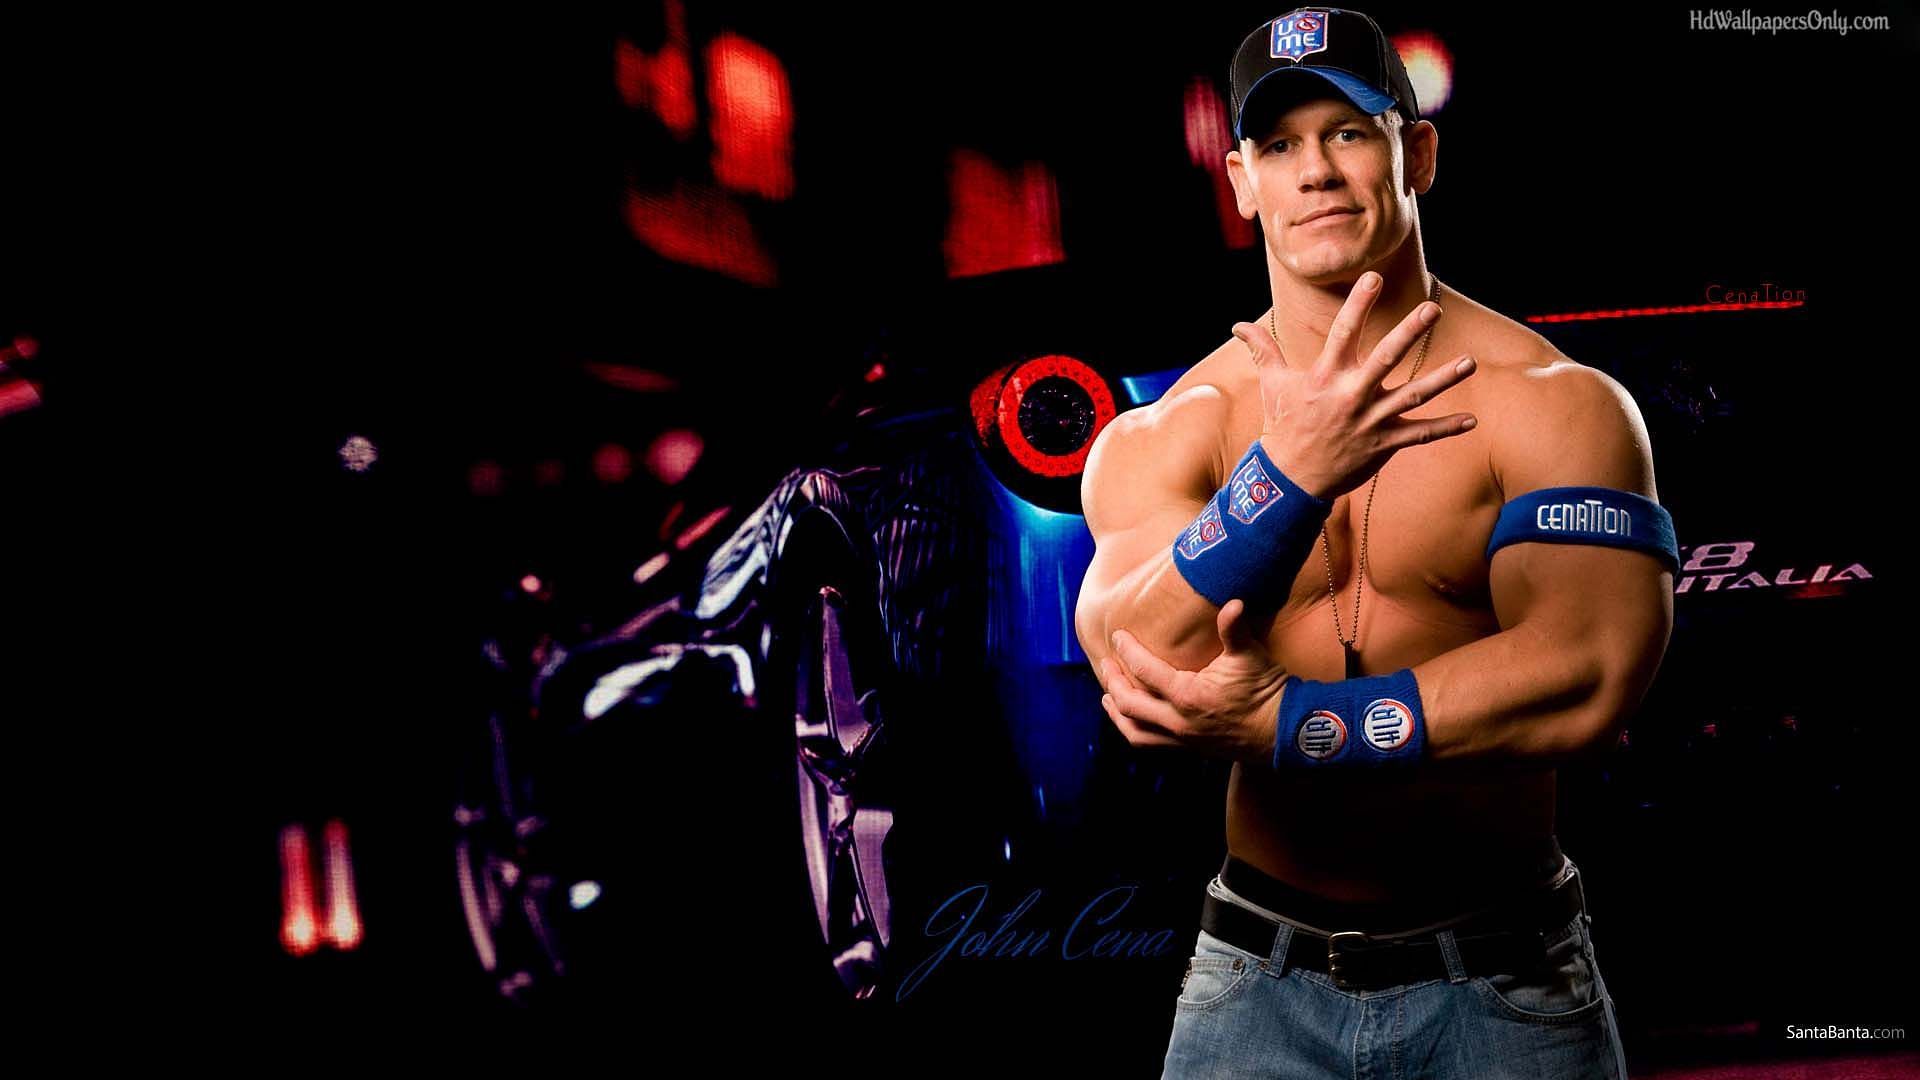 John Cena is one of many to have unfortunate &quot;accidents&quot; in the WWE ring